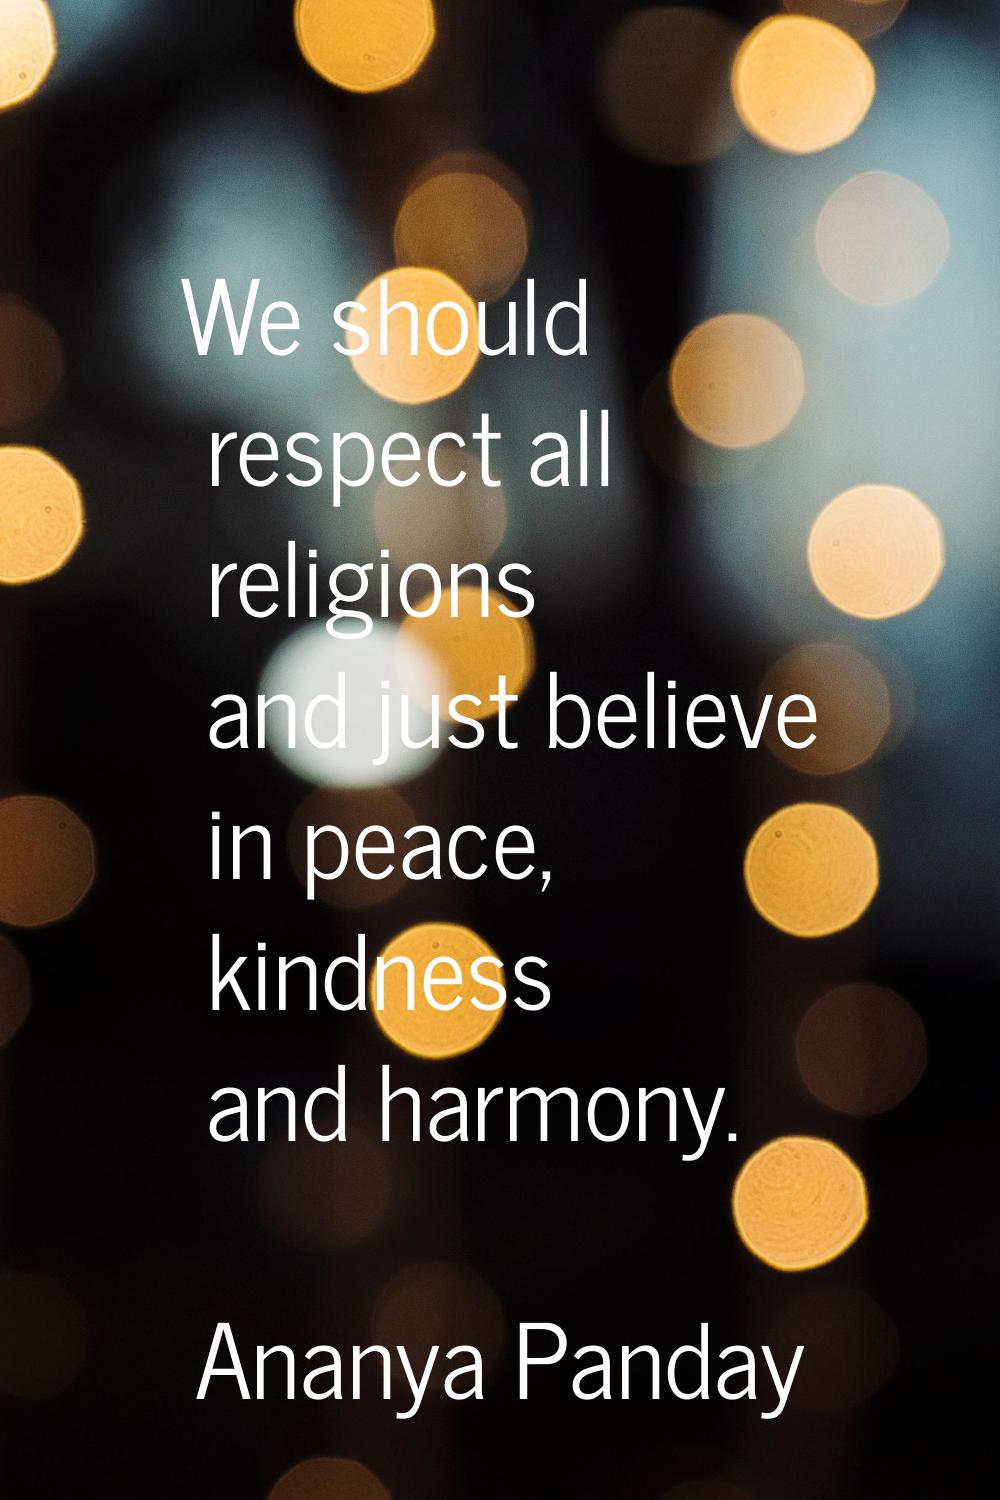 We should respect all religions and just believe in peace, kindness and harmony.